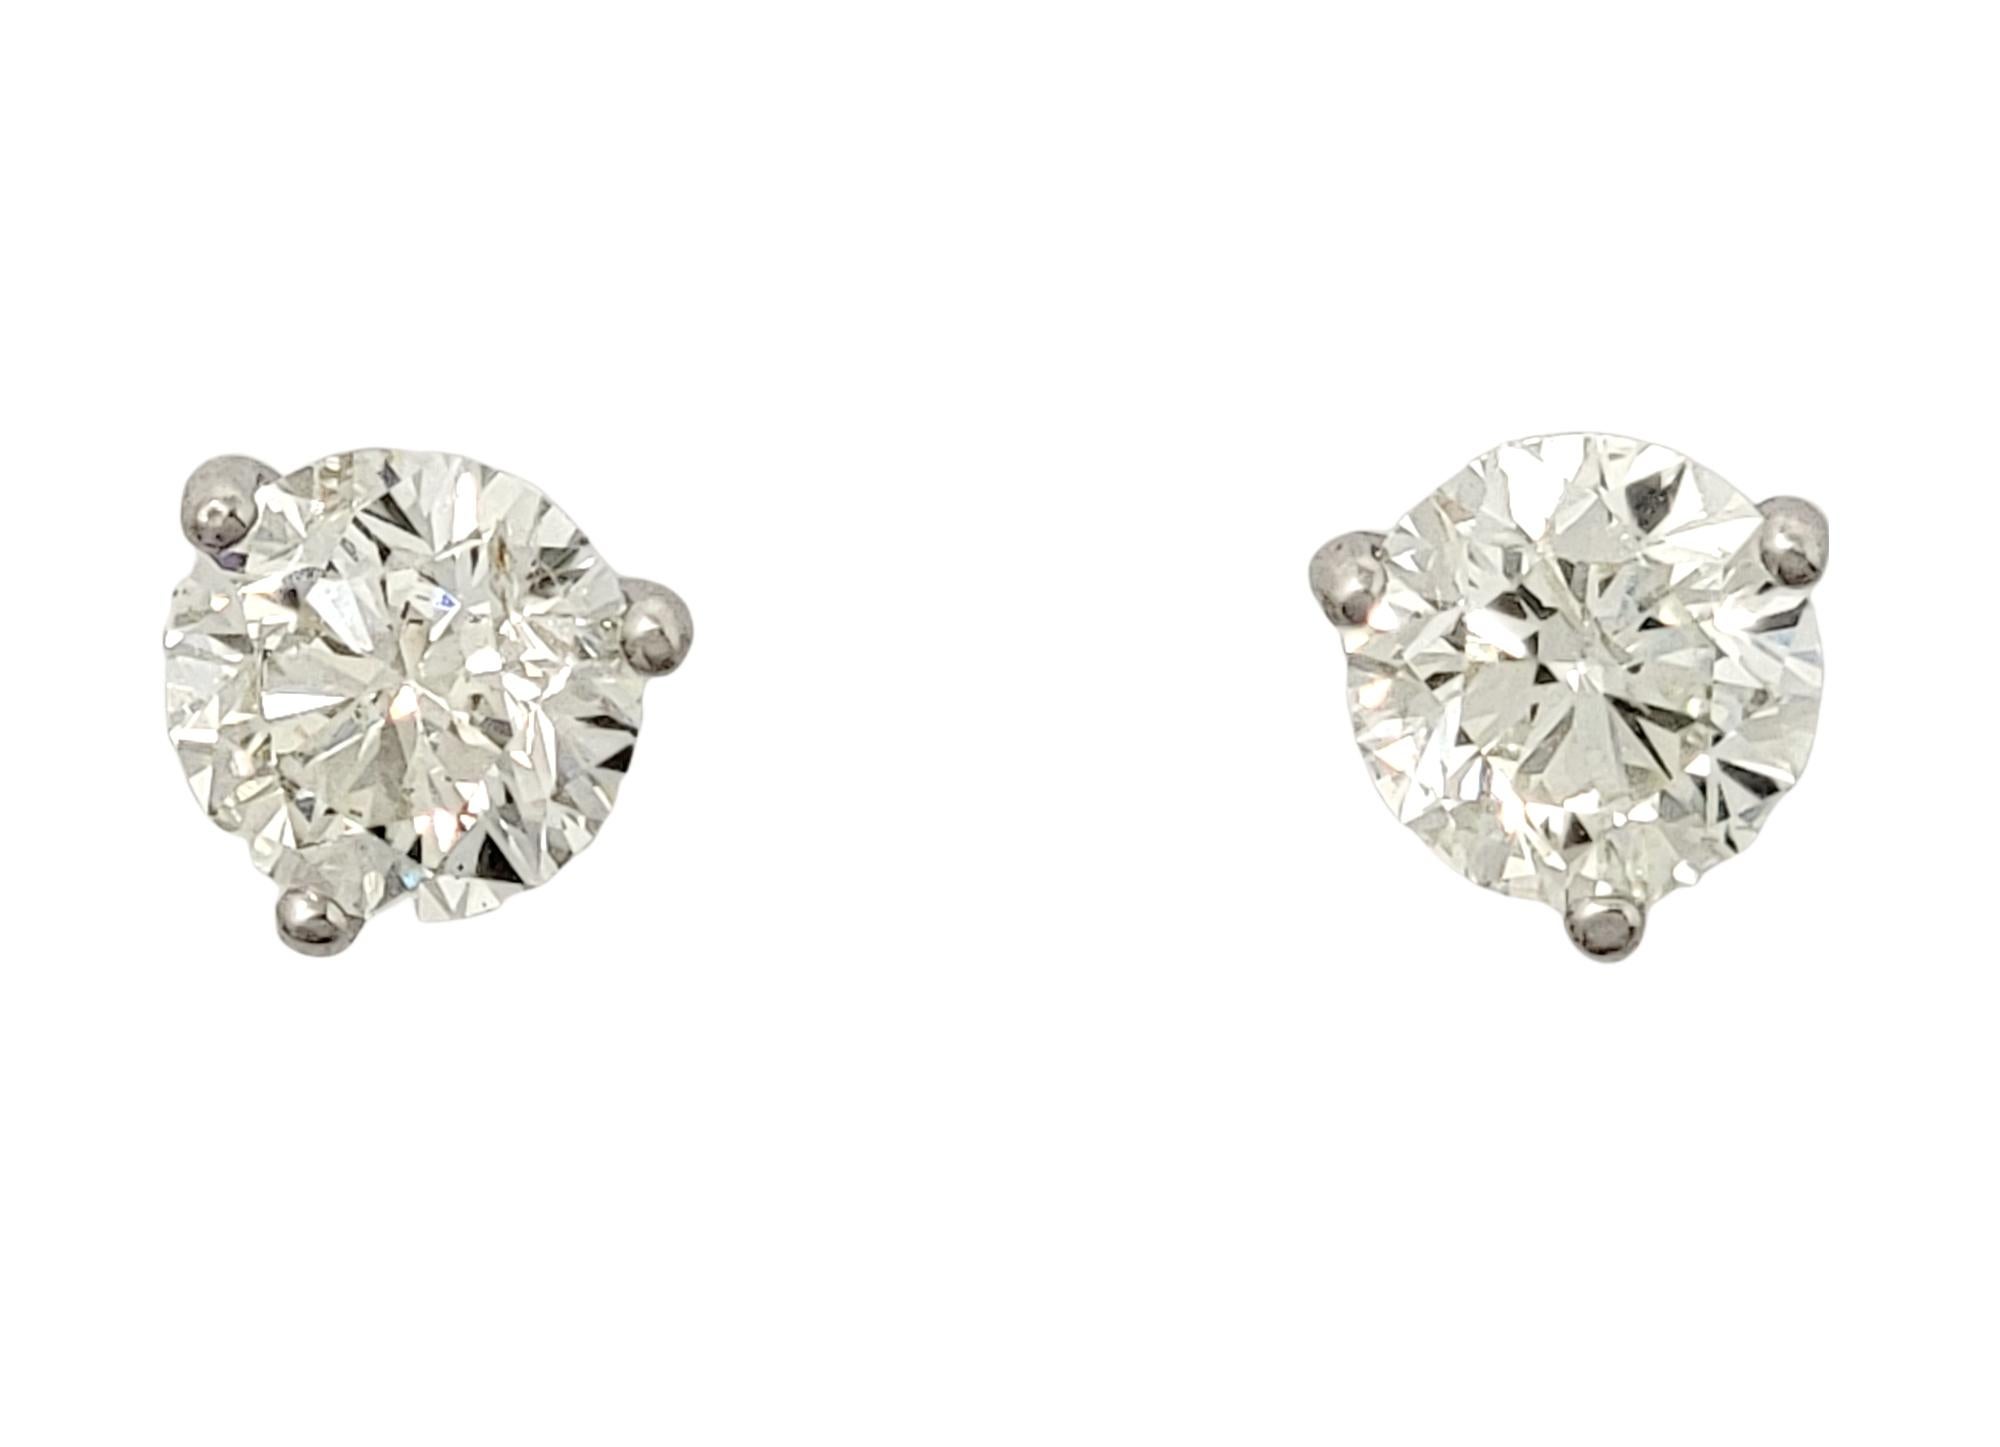 Utterly timeless diamond solitaire stud earrings. These gorgeous round diamond and white gold pierced ear studs are the epitome of minimalist elegance. The simple yet elegant design can be worn with just about anything, making these your new